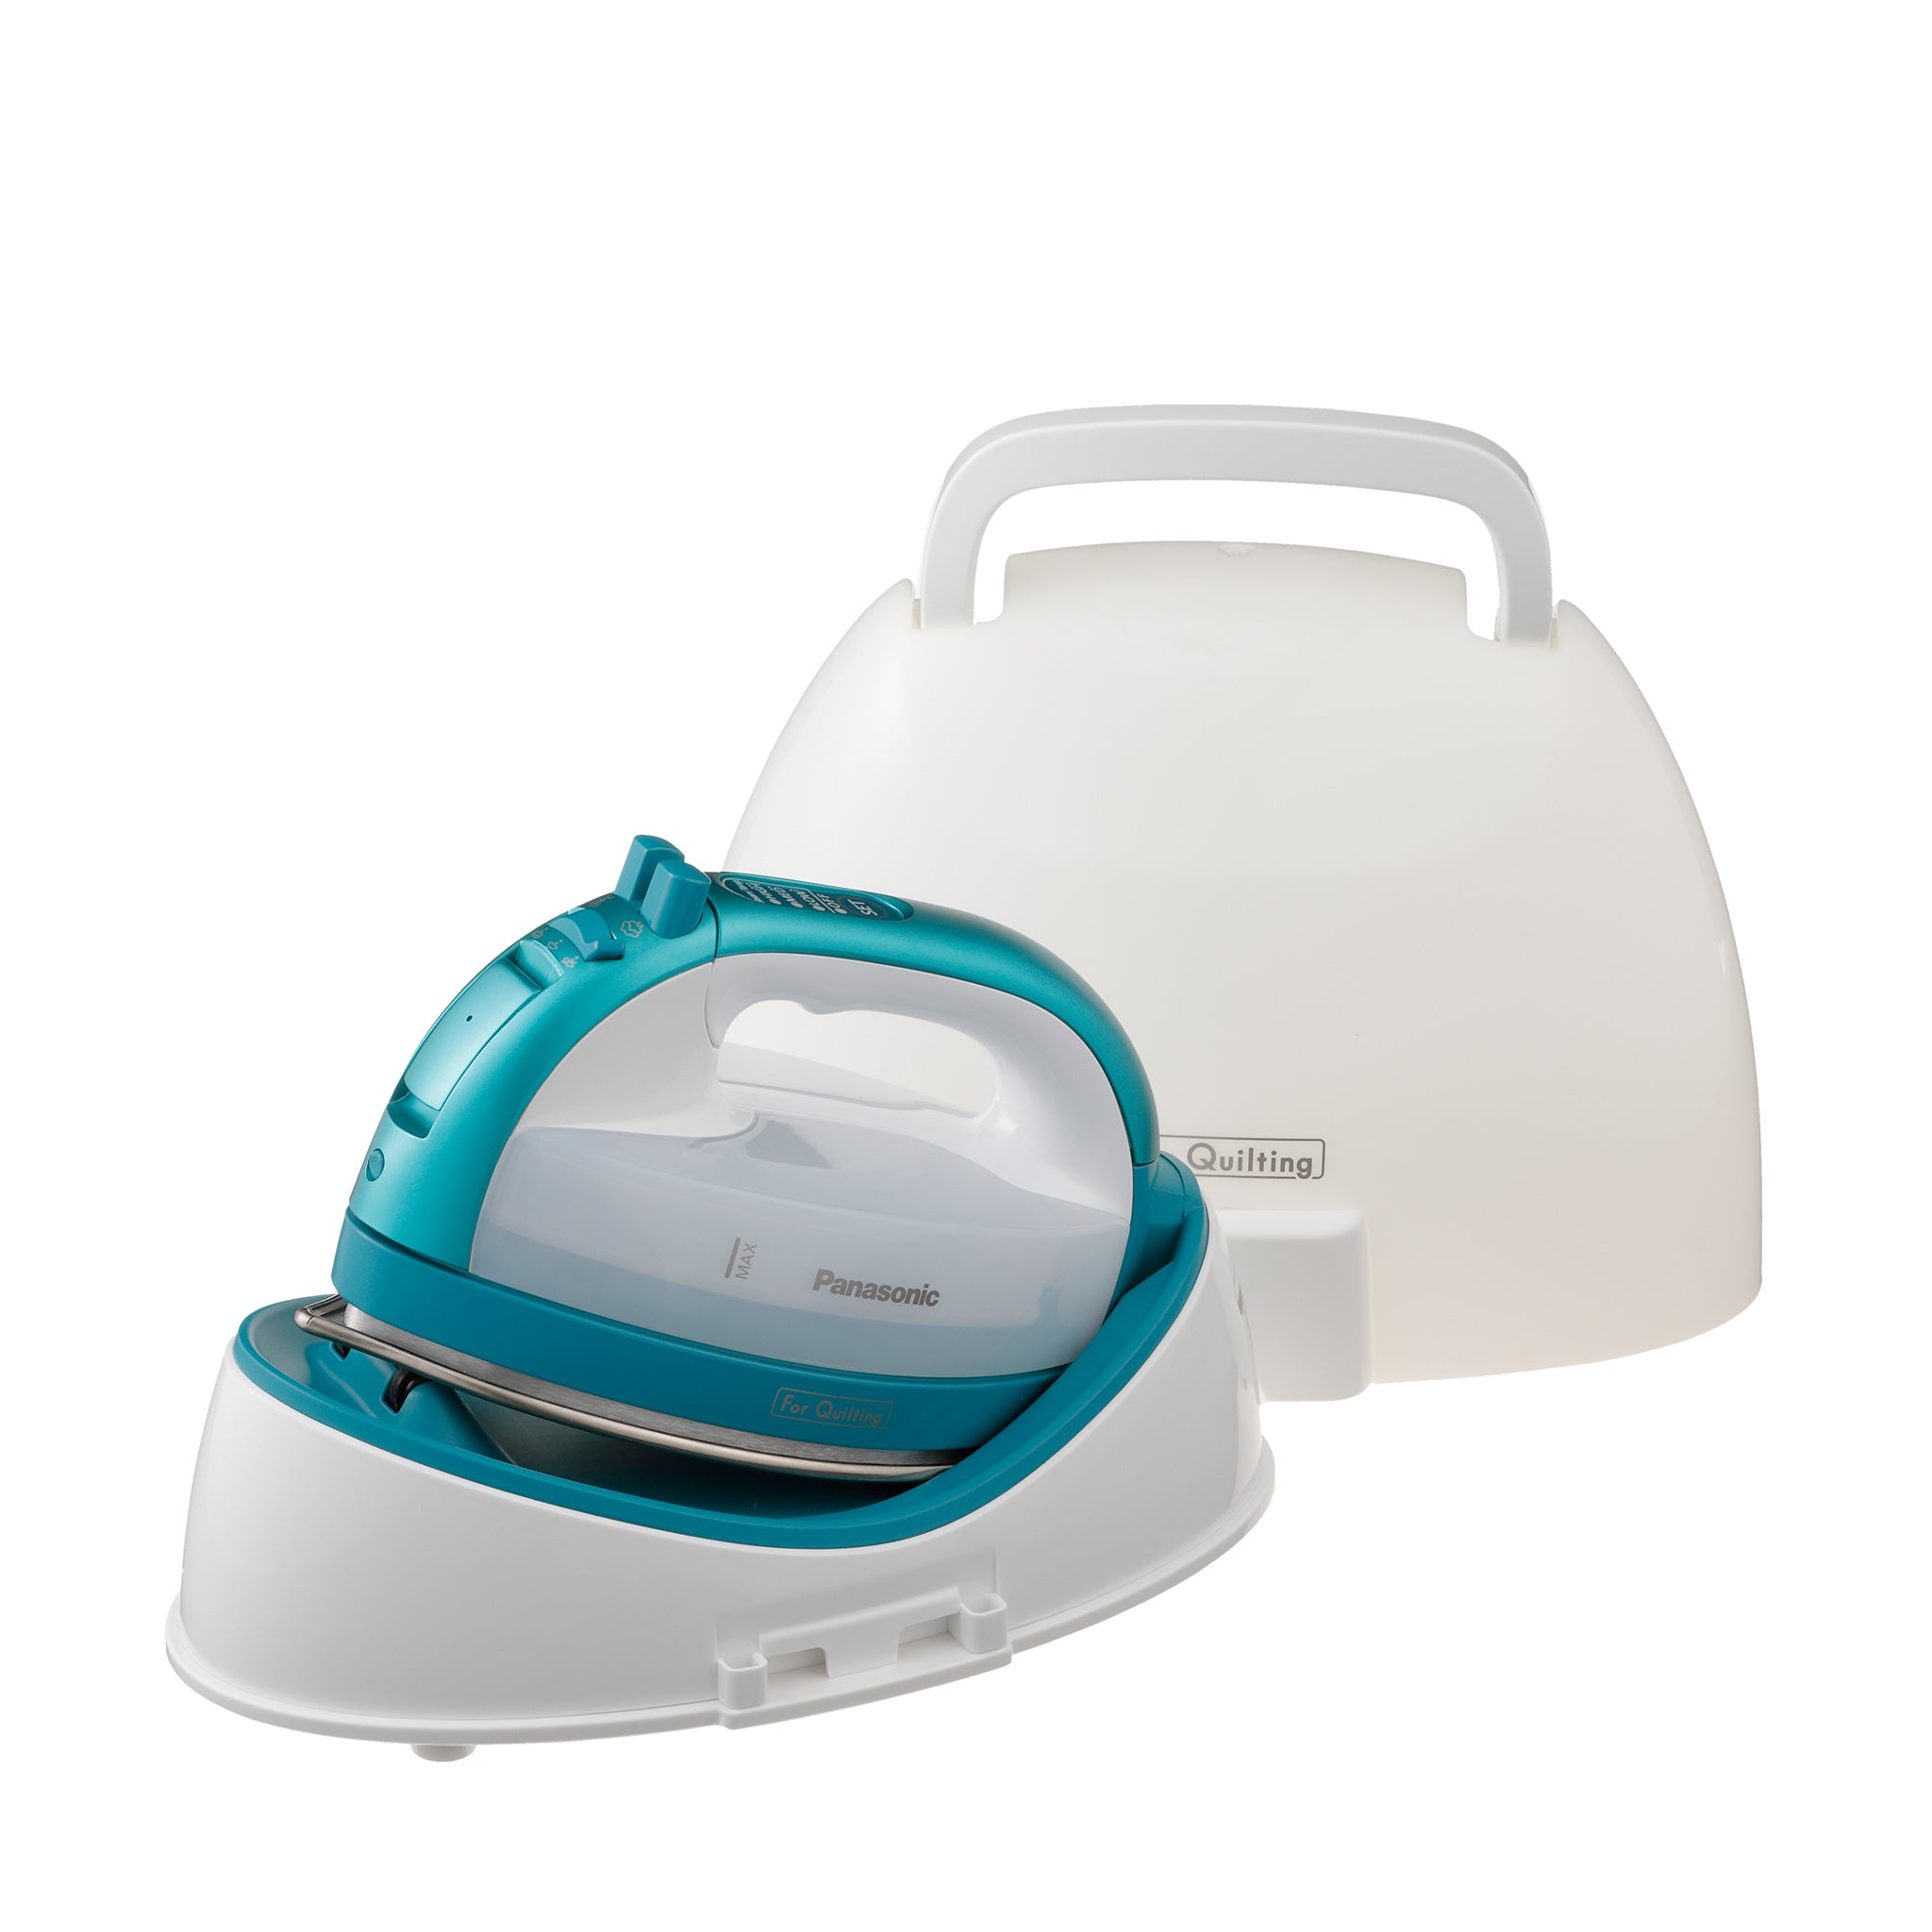 Cordless Steam/Dry Iron, 1500W Precise Stainless Plate